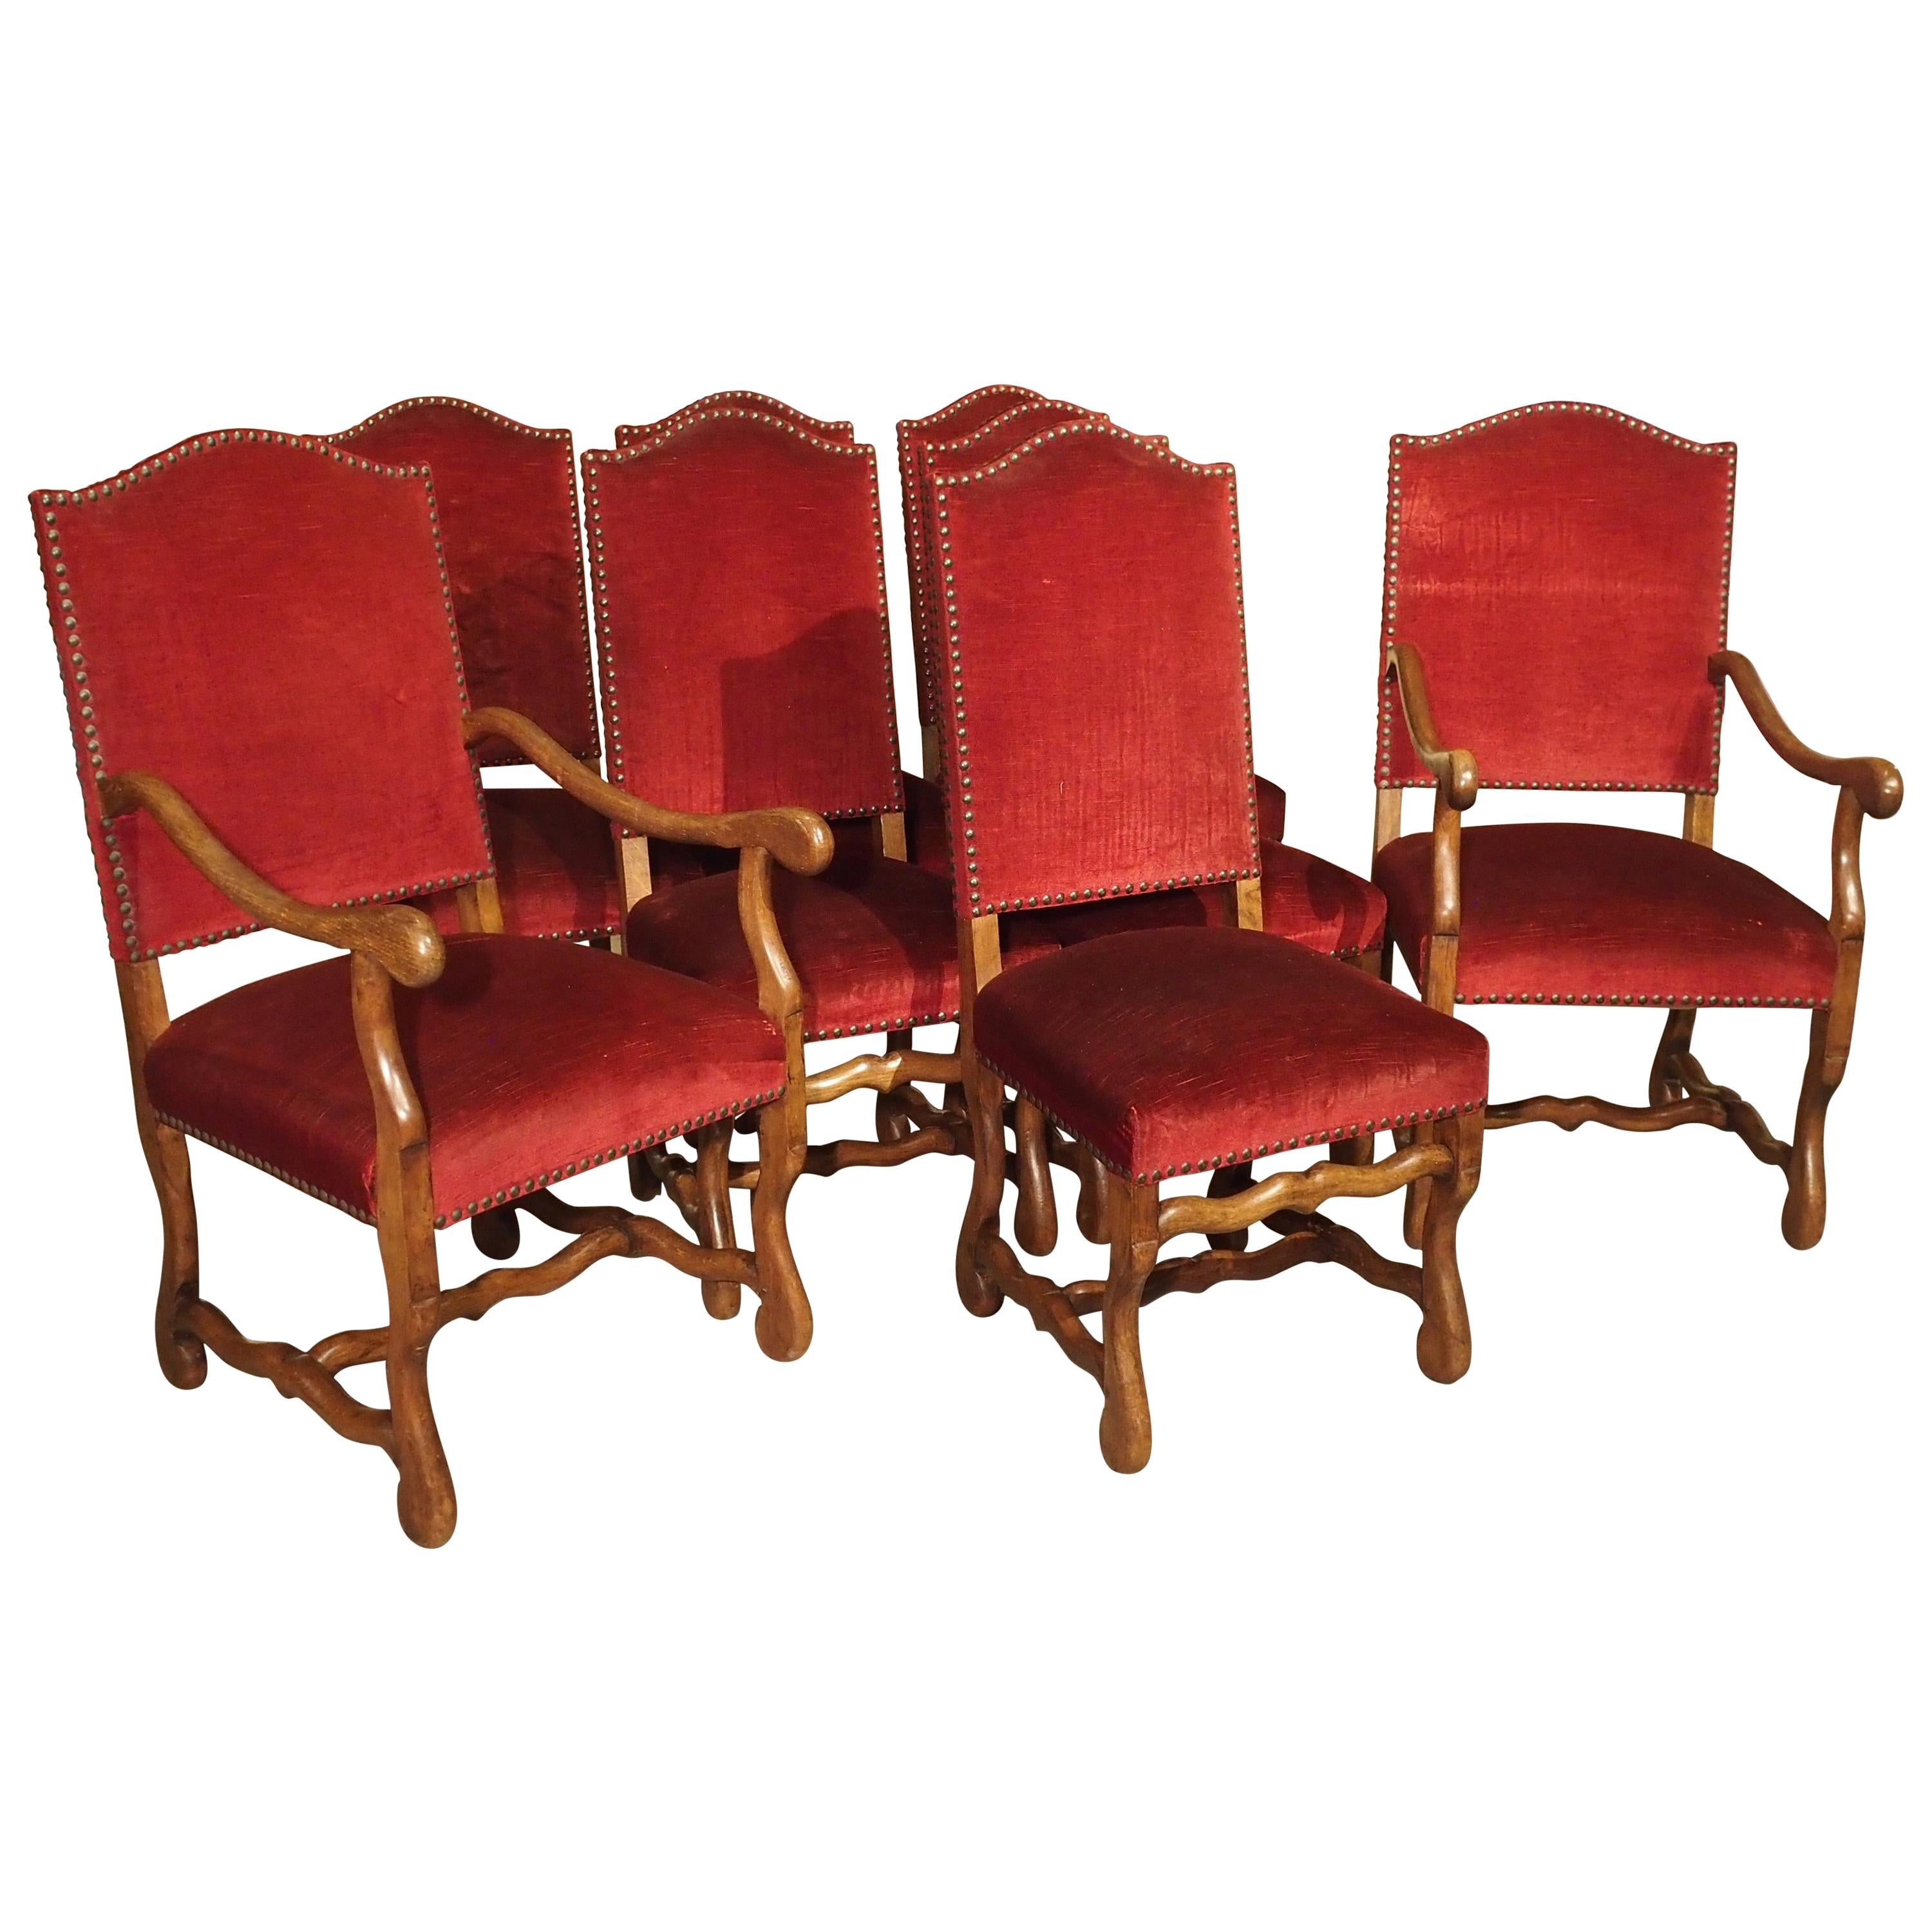 Set of 8 Antique Os de Mouton Dining Chairs with Square Peg Construction